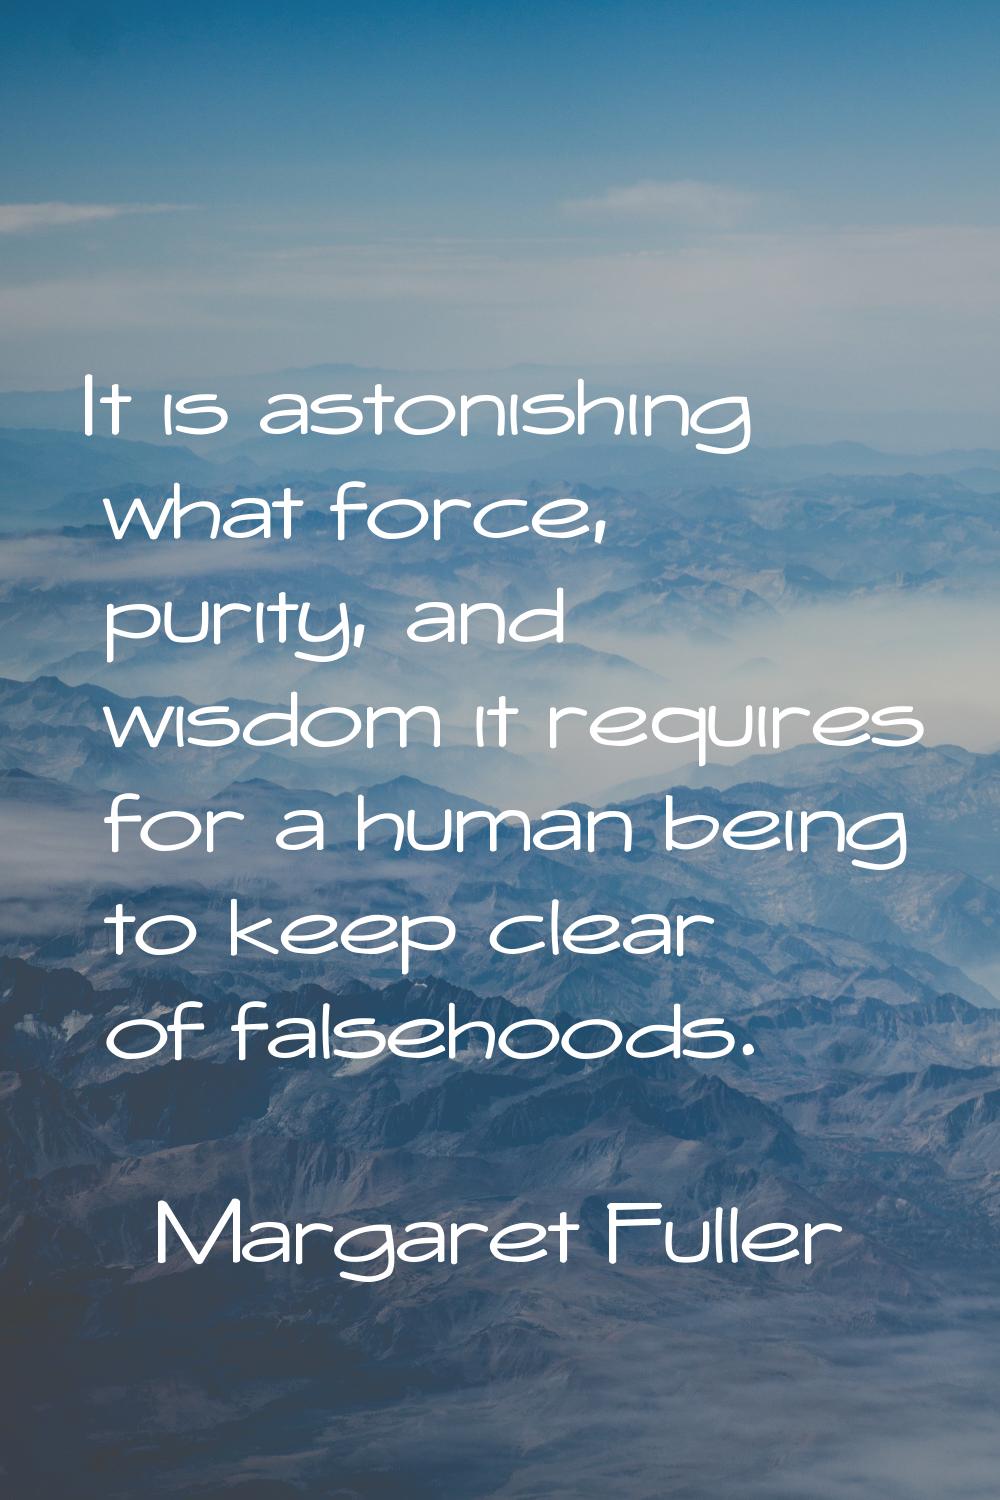 It is astonishing what force, purity, and wisdom it requires for a human being to keep clear of fal